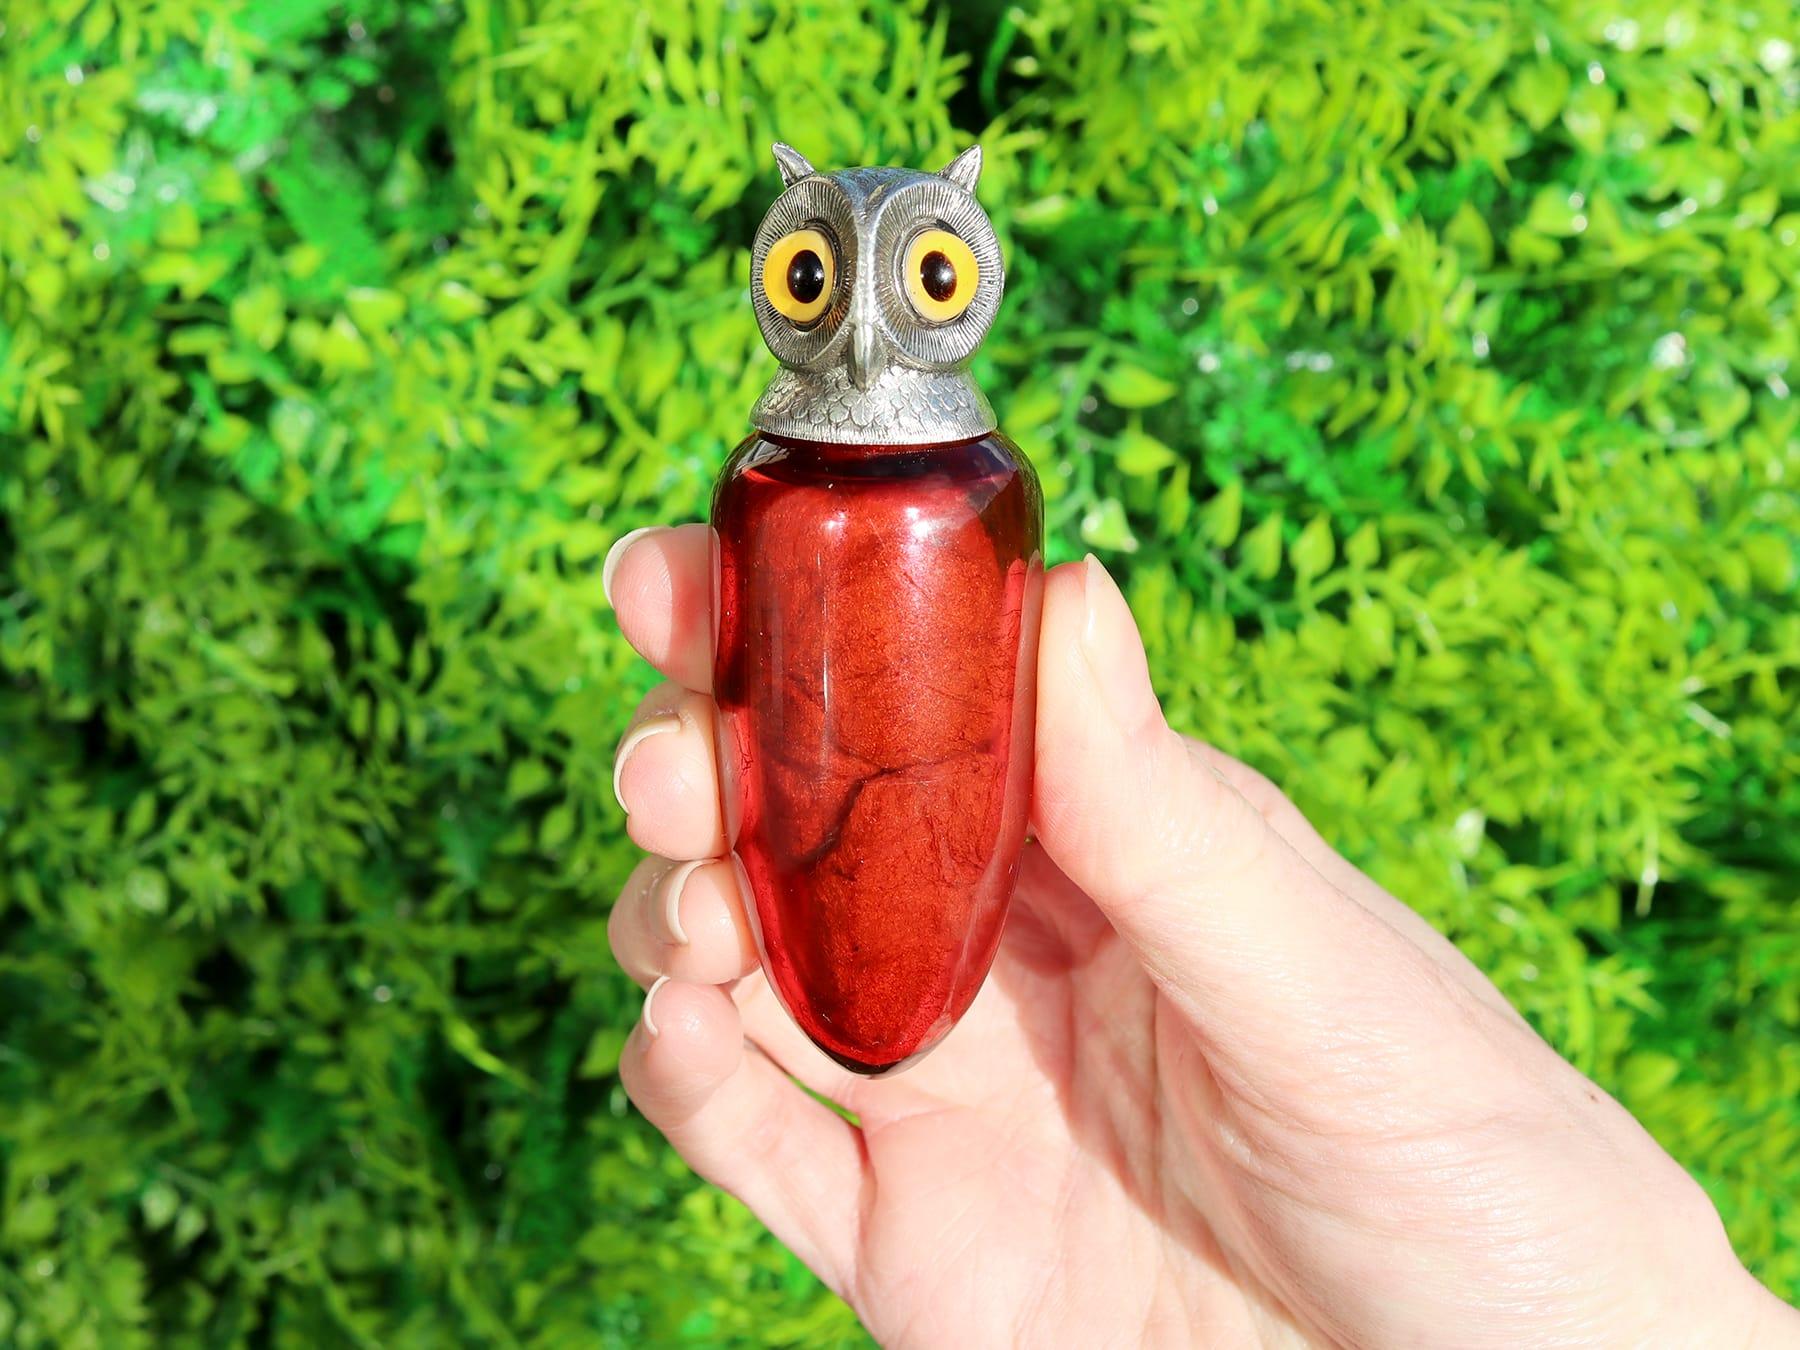 An exceptional, fine and impressive antique Victorian English sterling silver and cranberry glass owl scent bottle; an addition to our diverse collectable silverware collection.

This exceptional antique Victorian sterling silver scent bottle has a